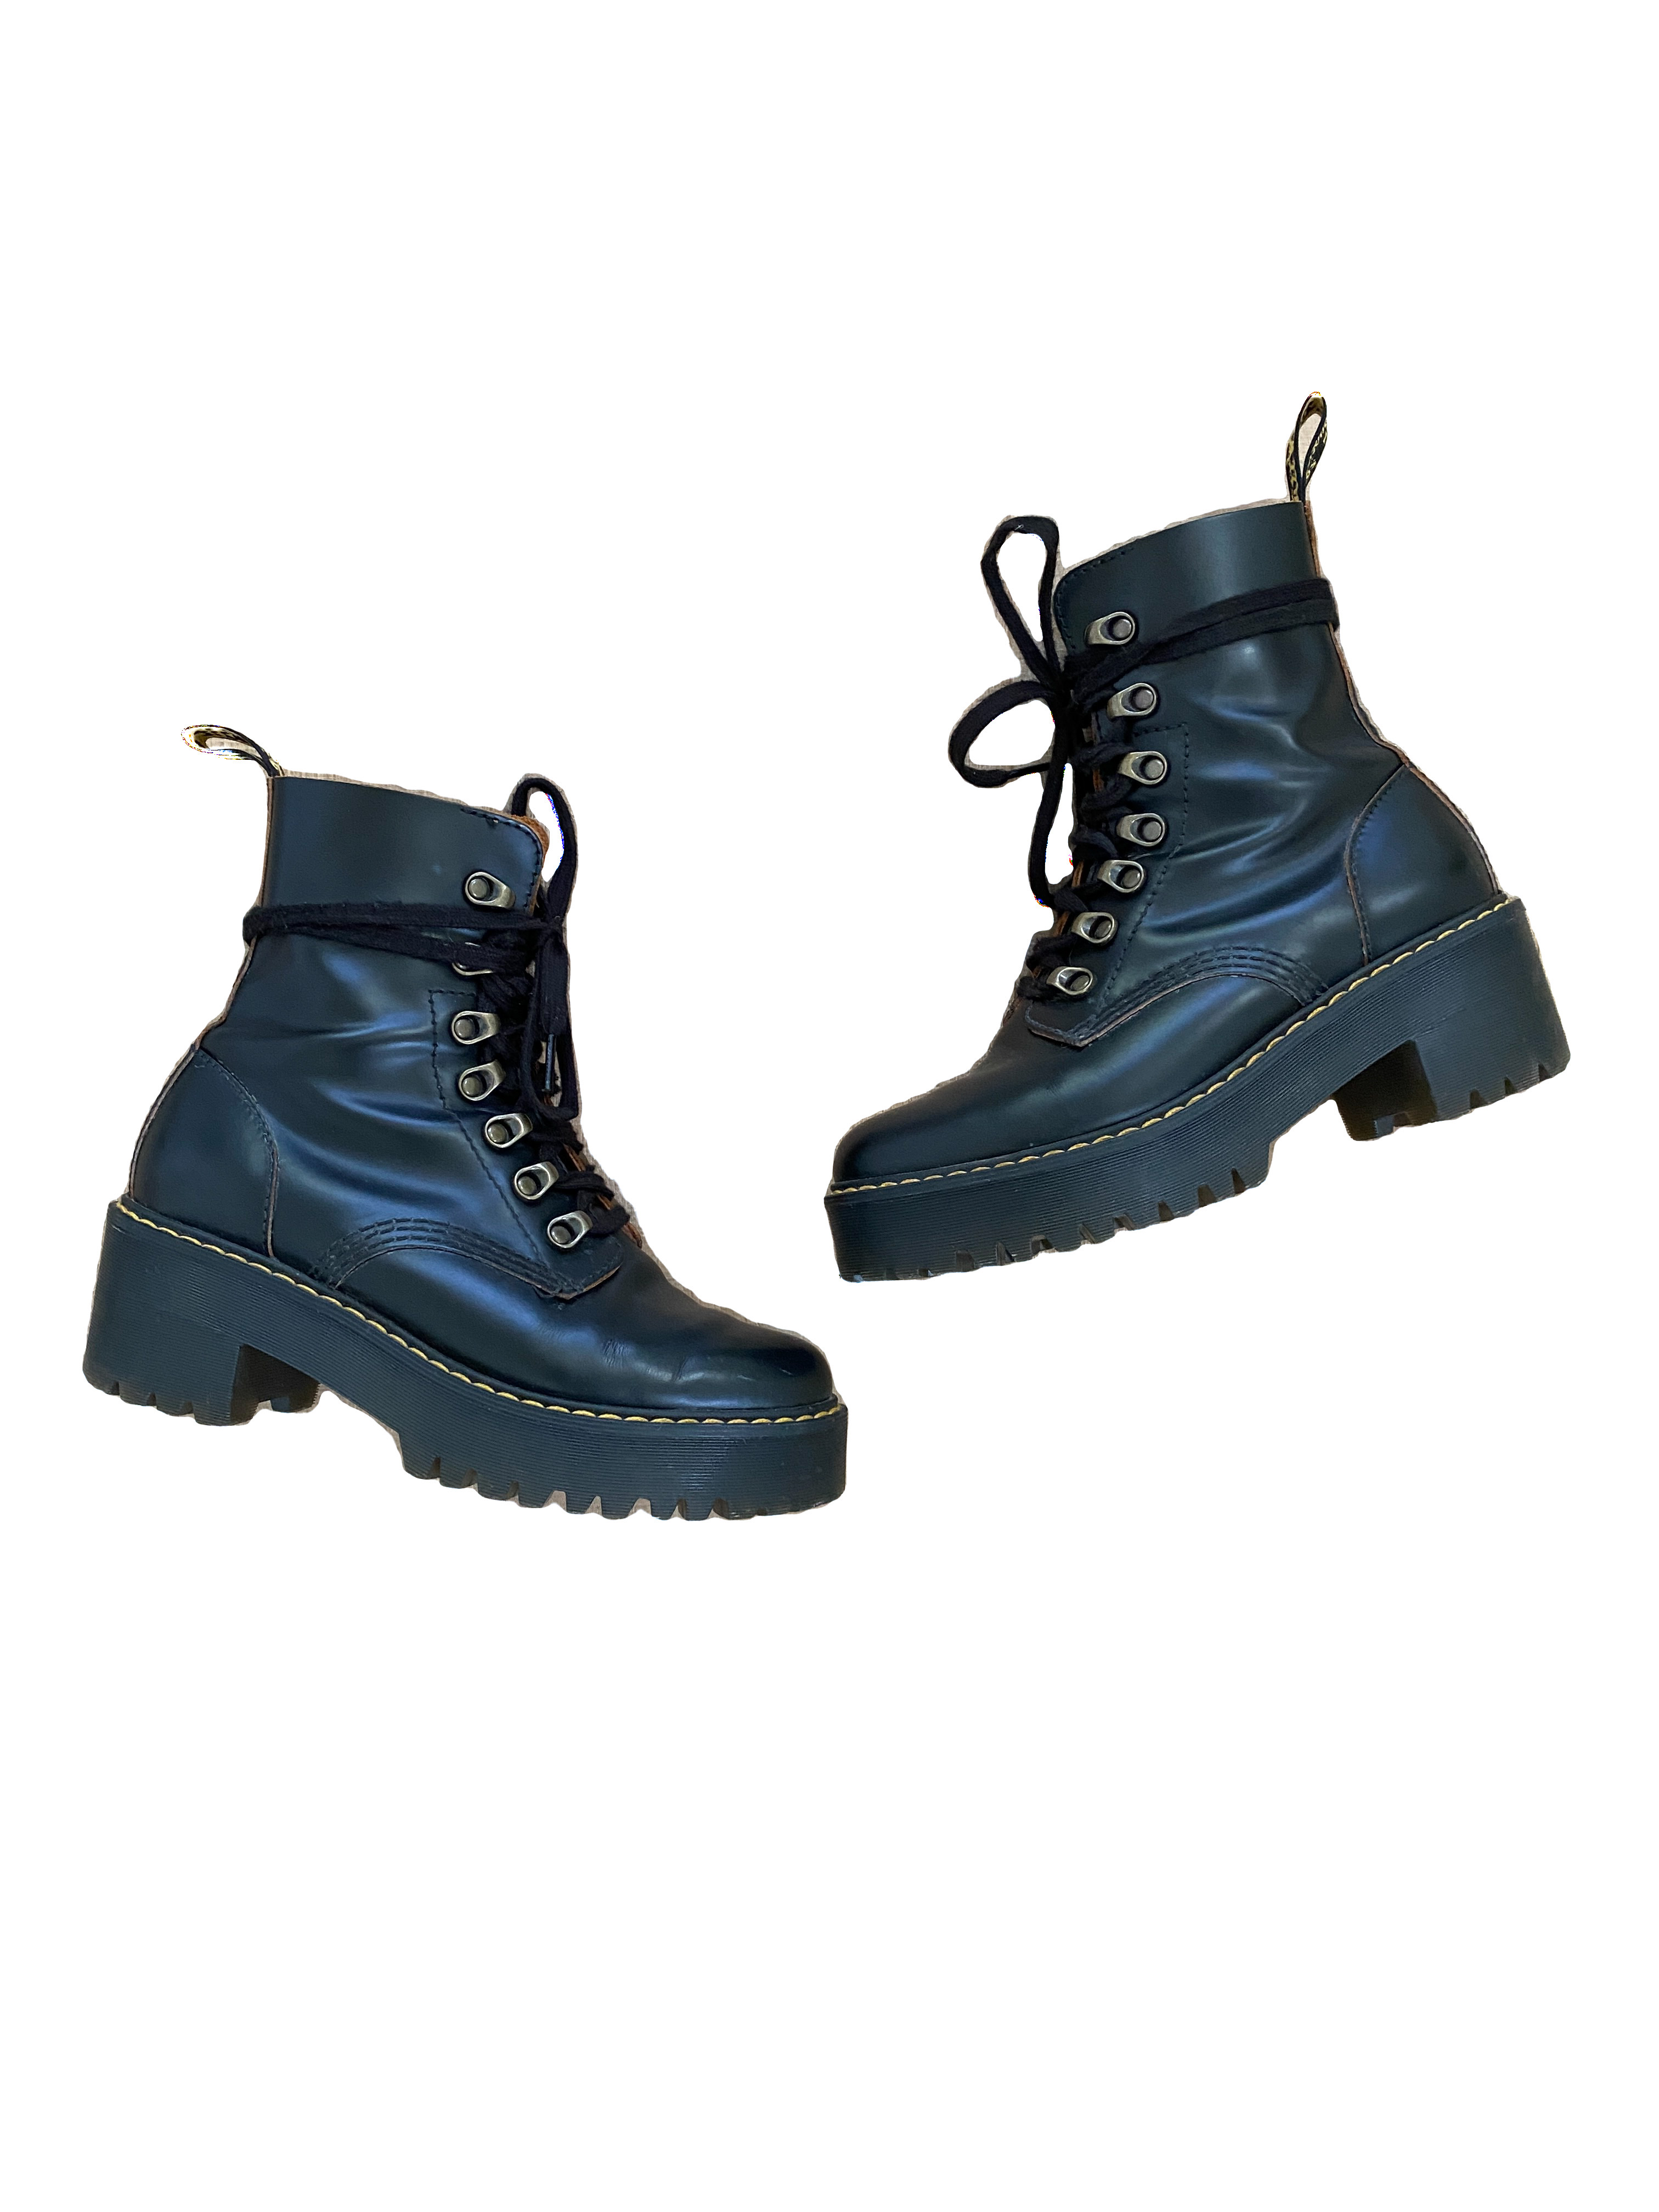 A pair of black combat boots that I've included in my fall shoe capsule are silhouetted against a white background with text alongside them.